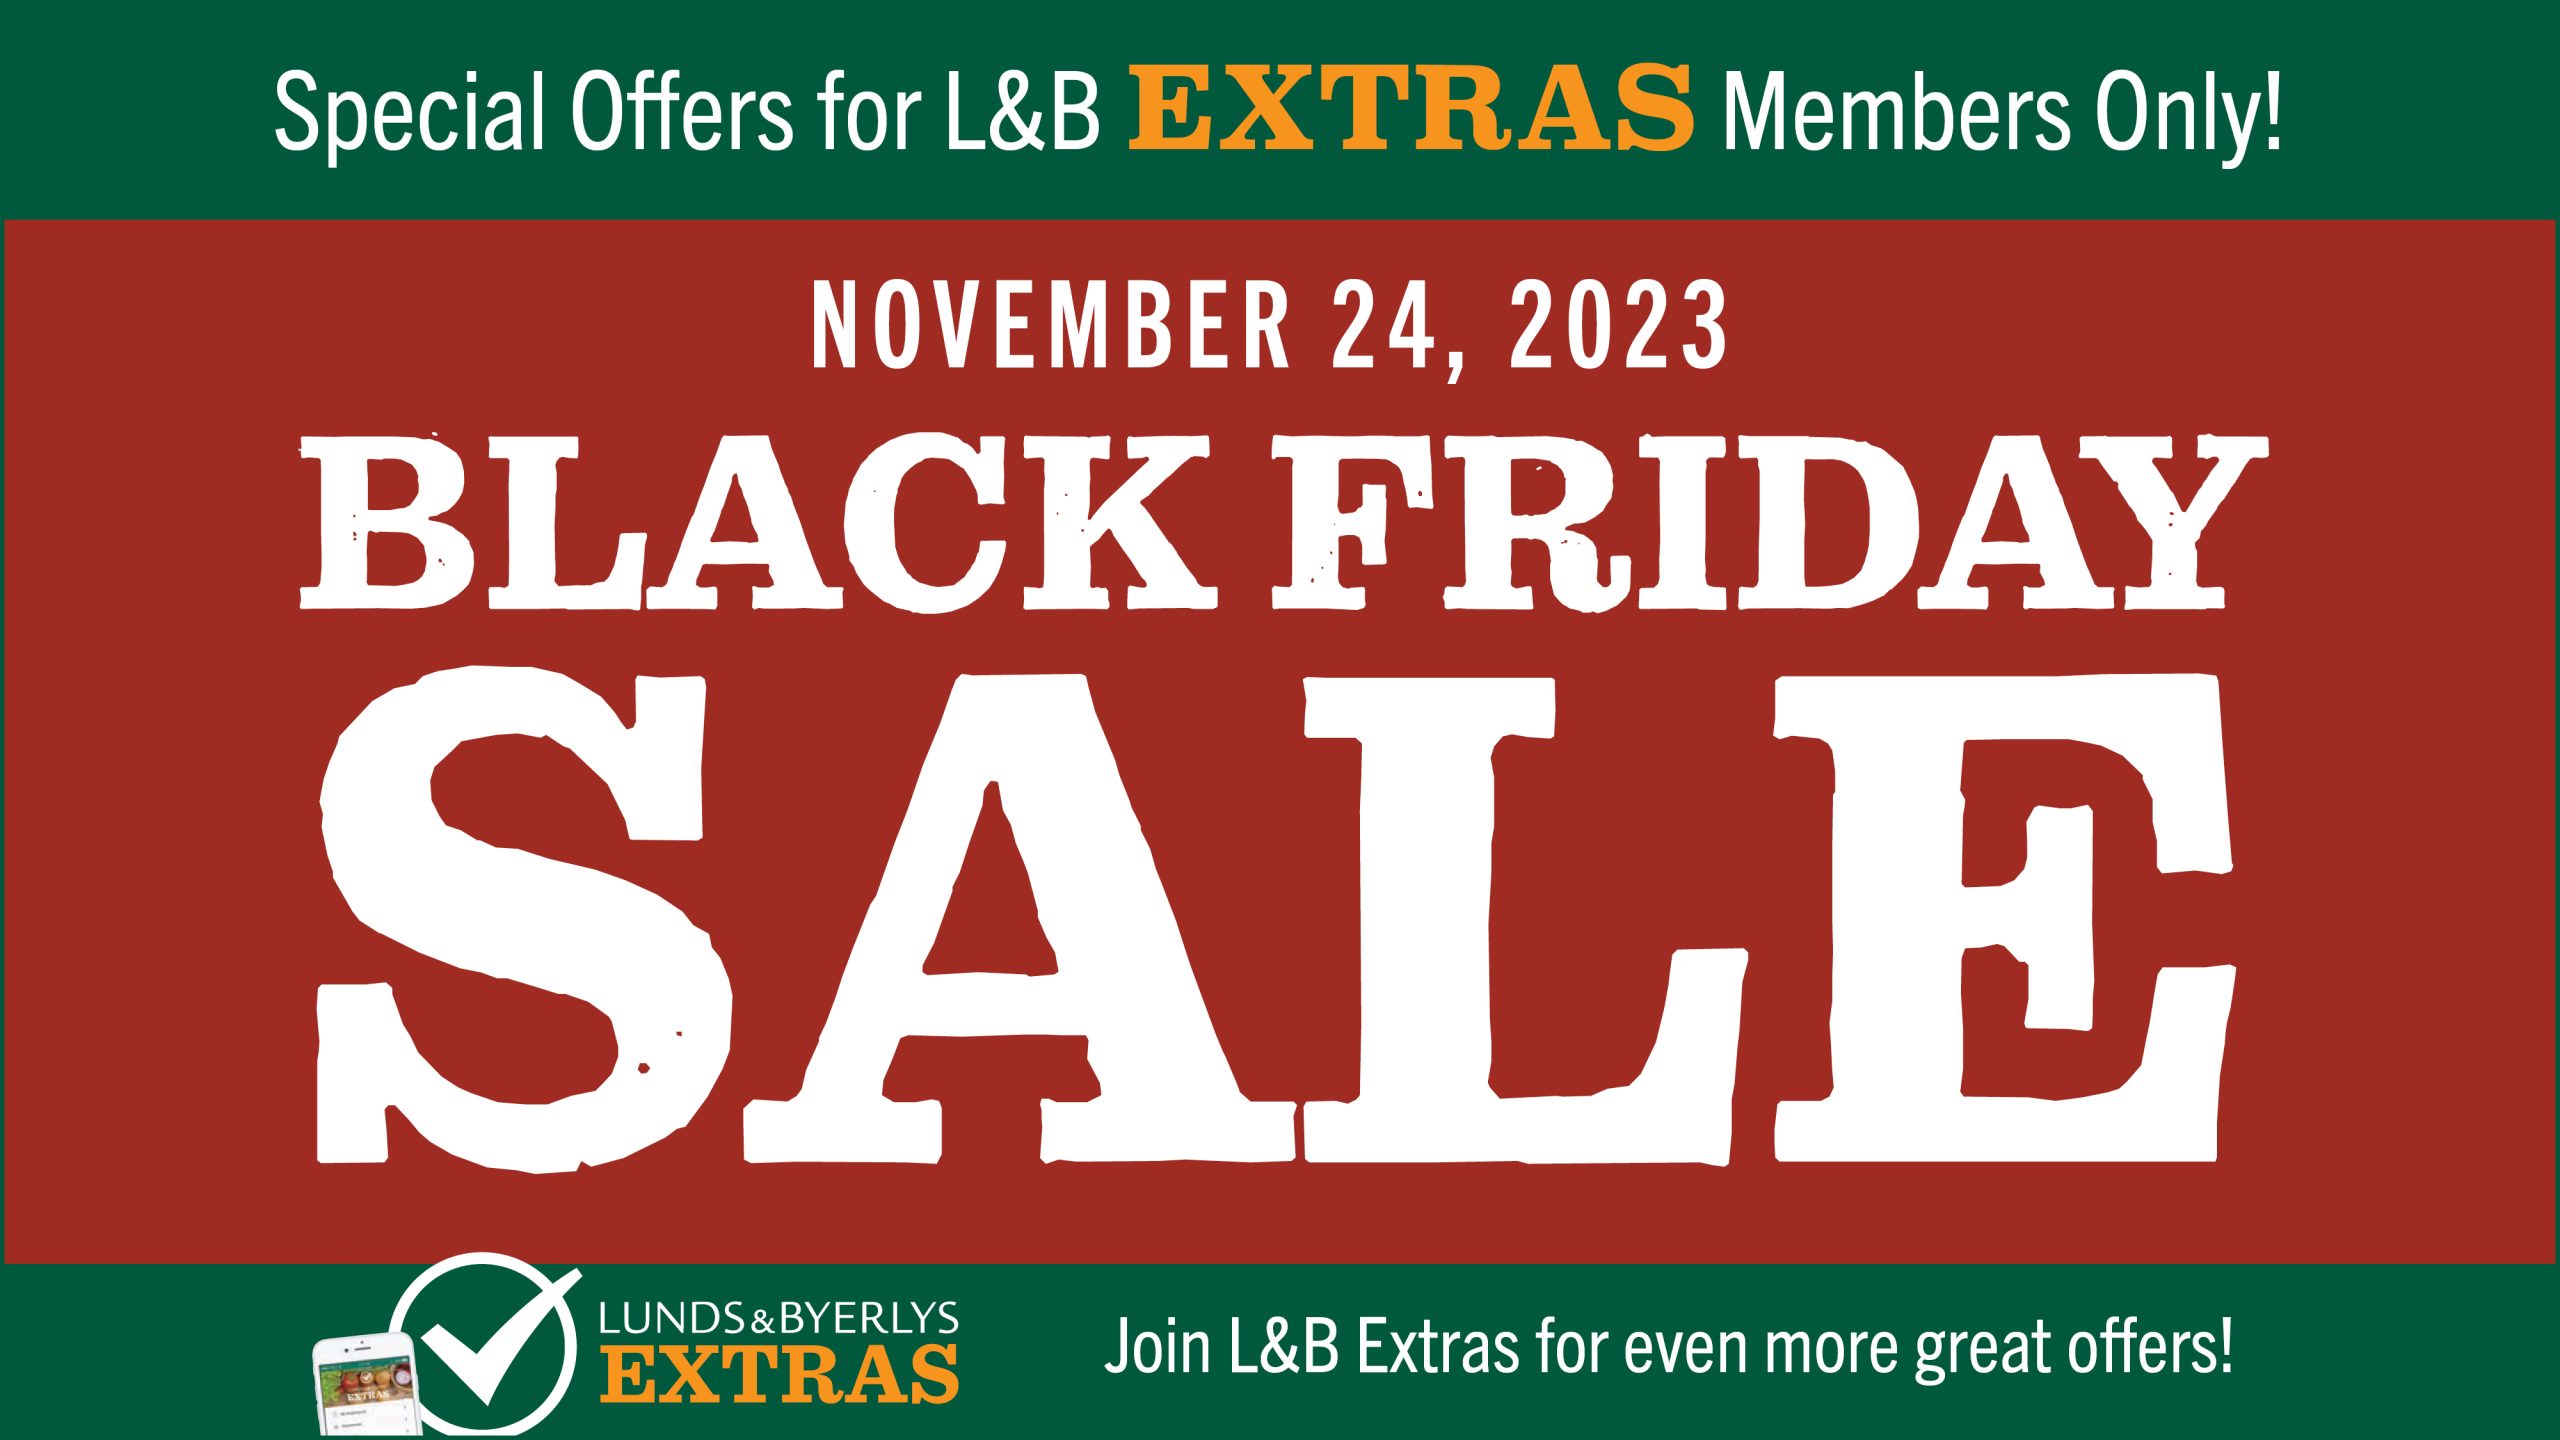 Special Offers for L&B Extras Members! Friday, November 24 only! While supplies last.